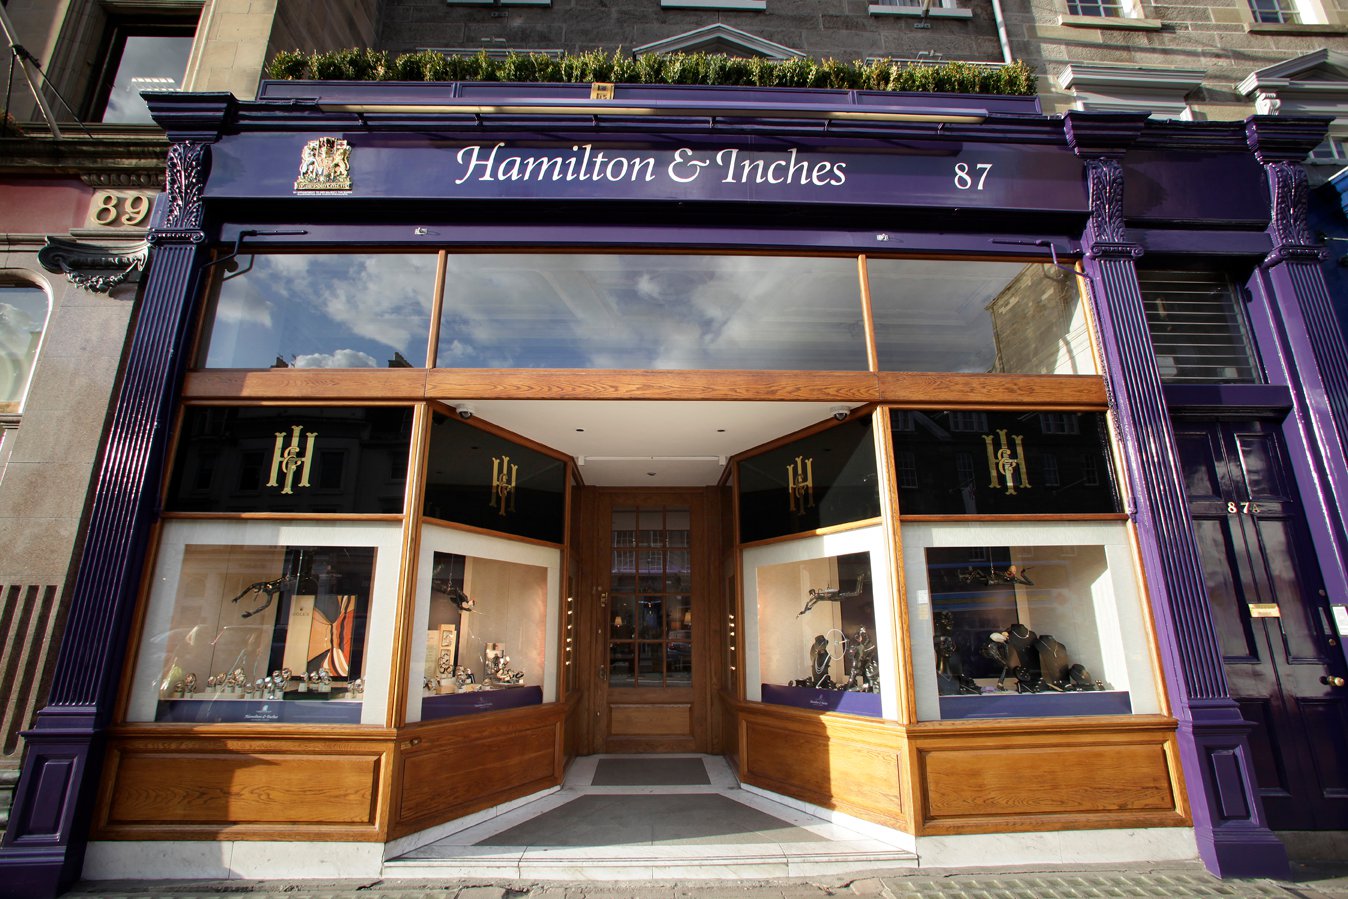 Hamilton and inches storefront